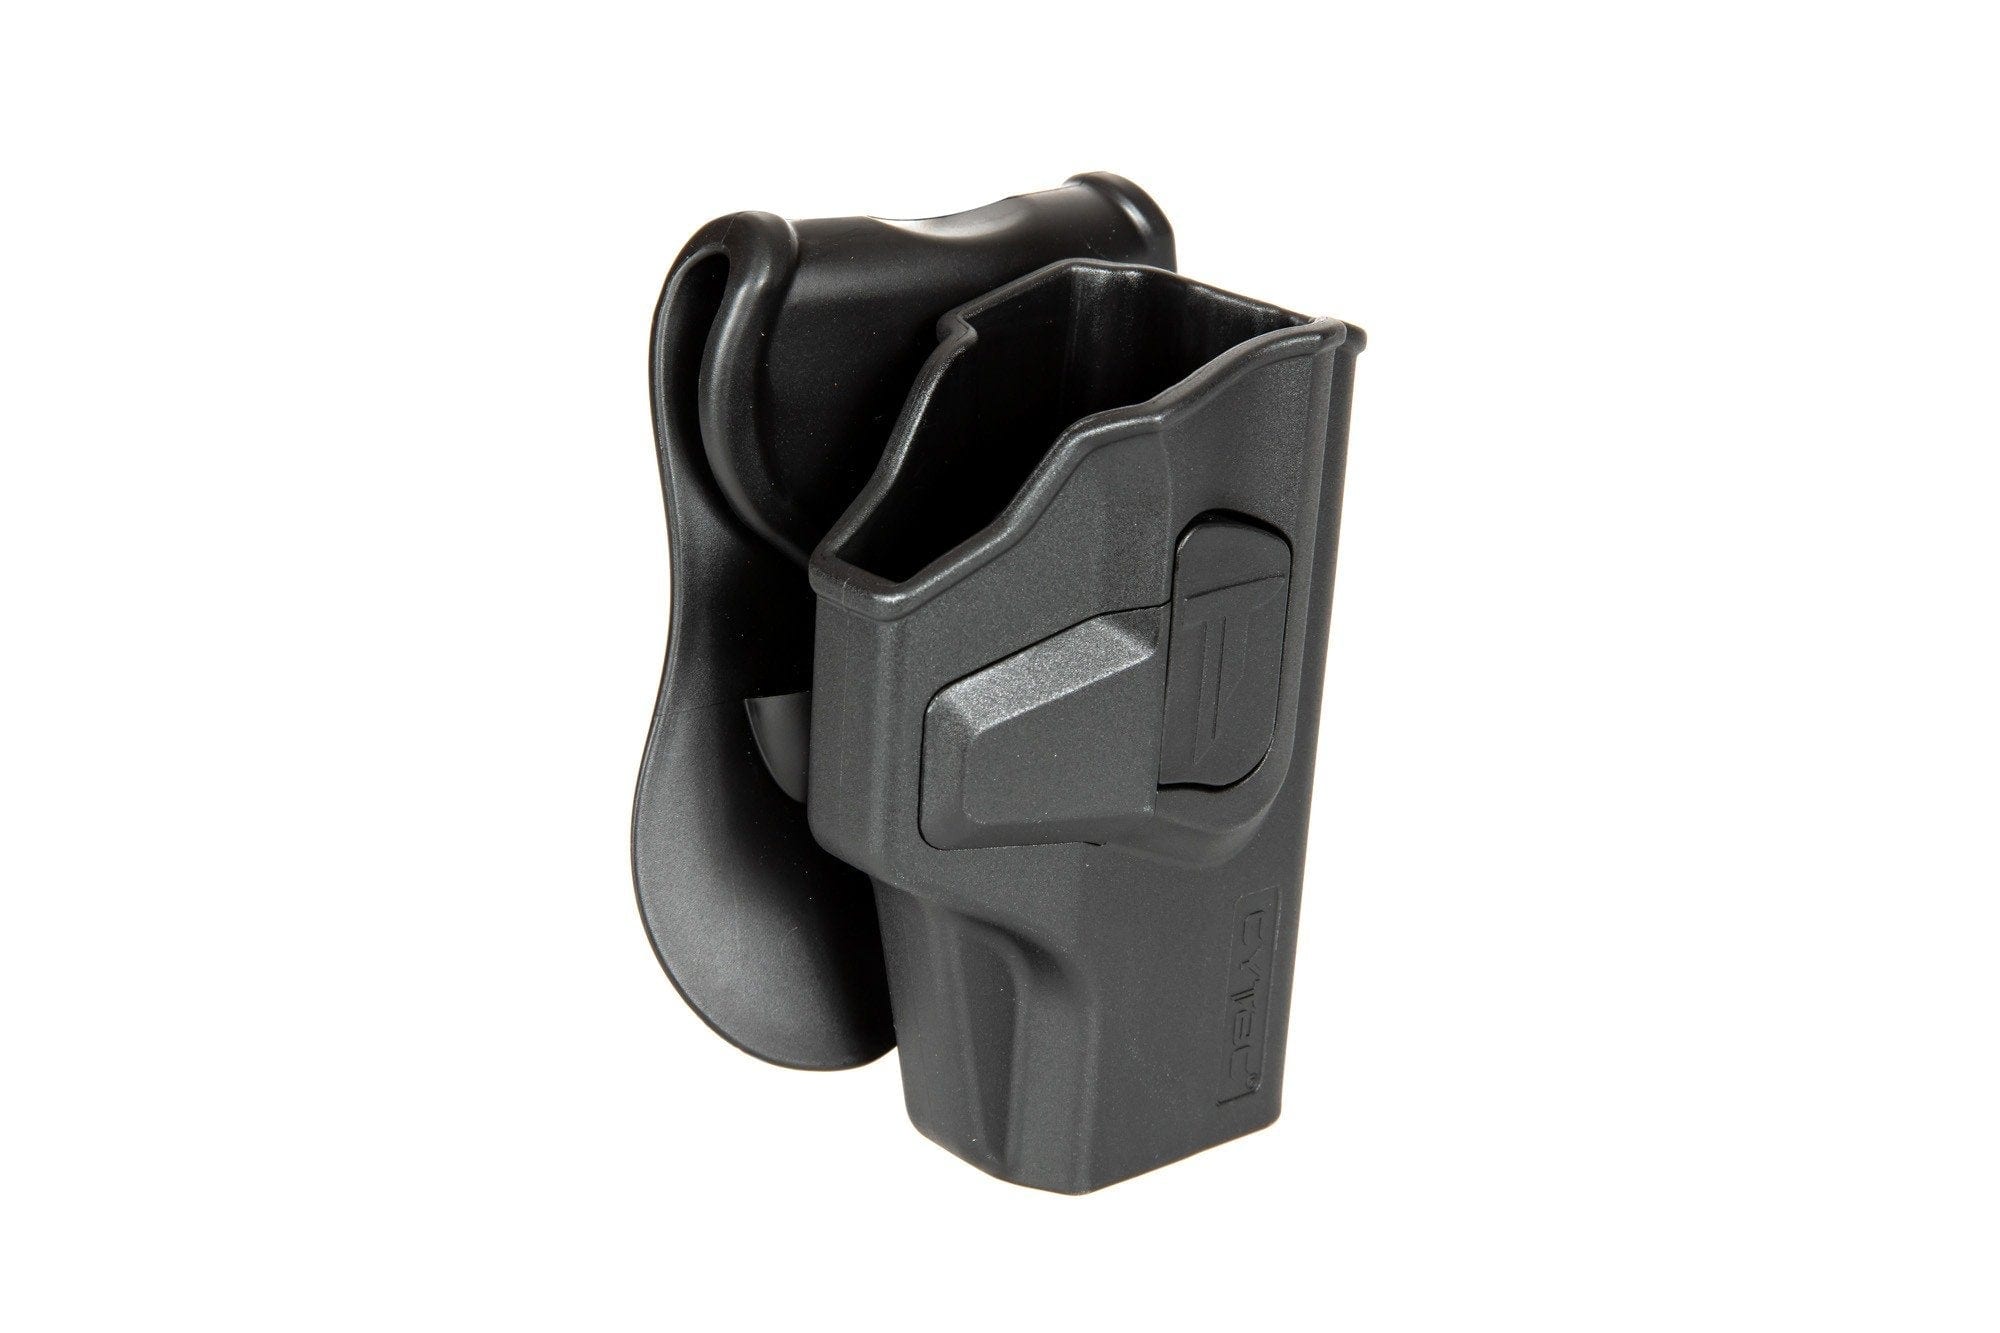 R-DEFENDER Holster for P320, M18 Pistols (Paddle + MOLLE adapter)